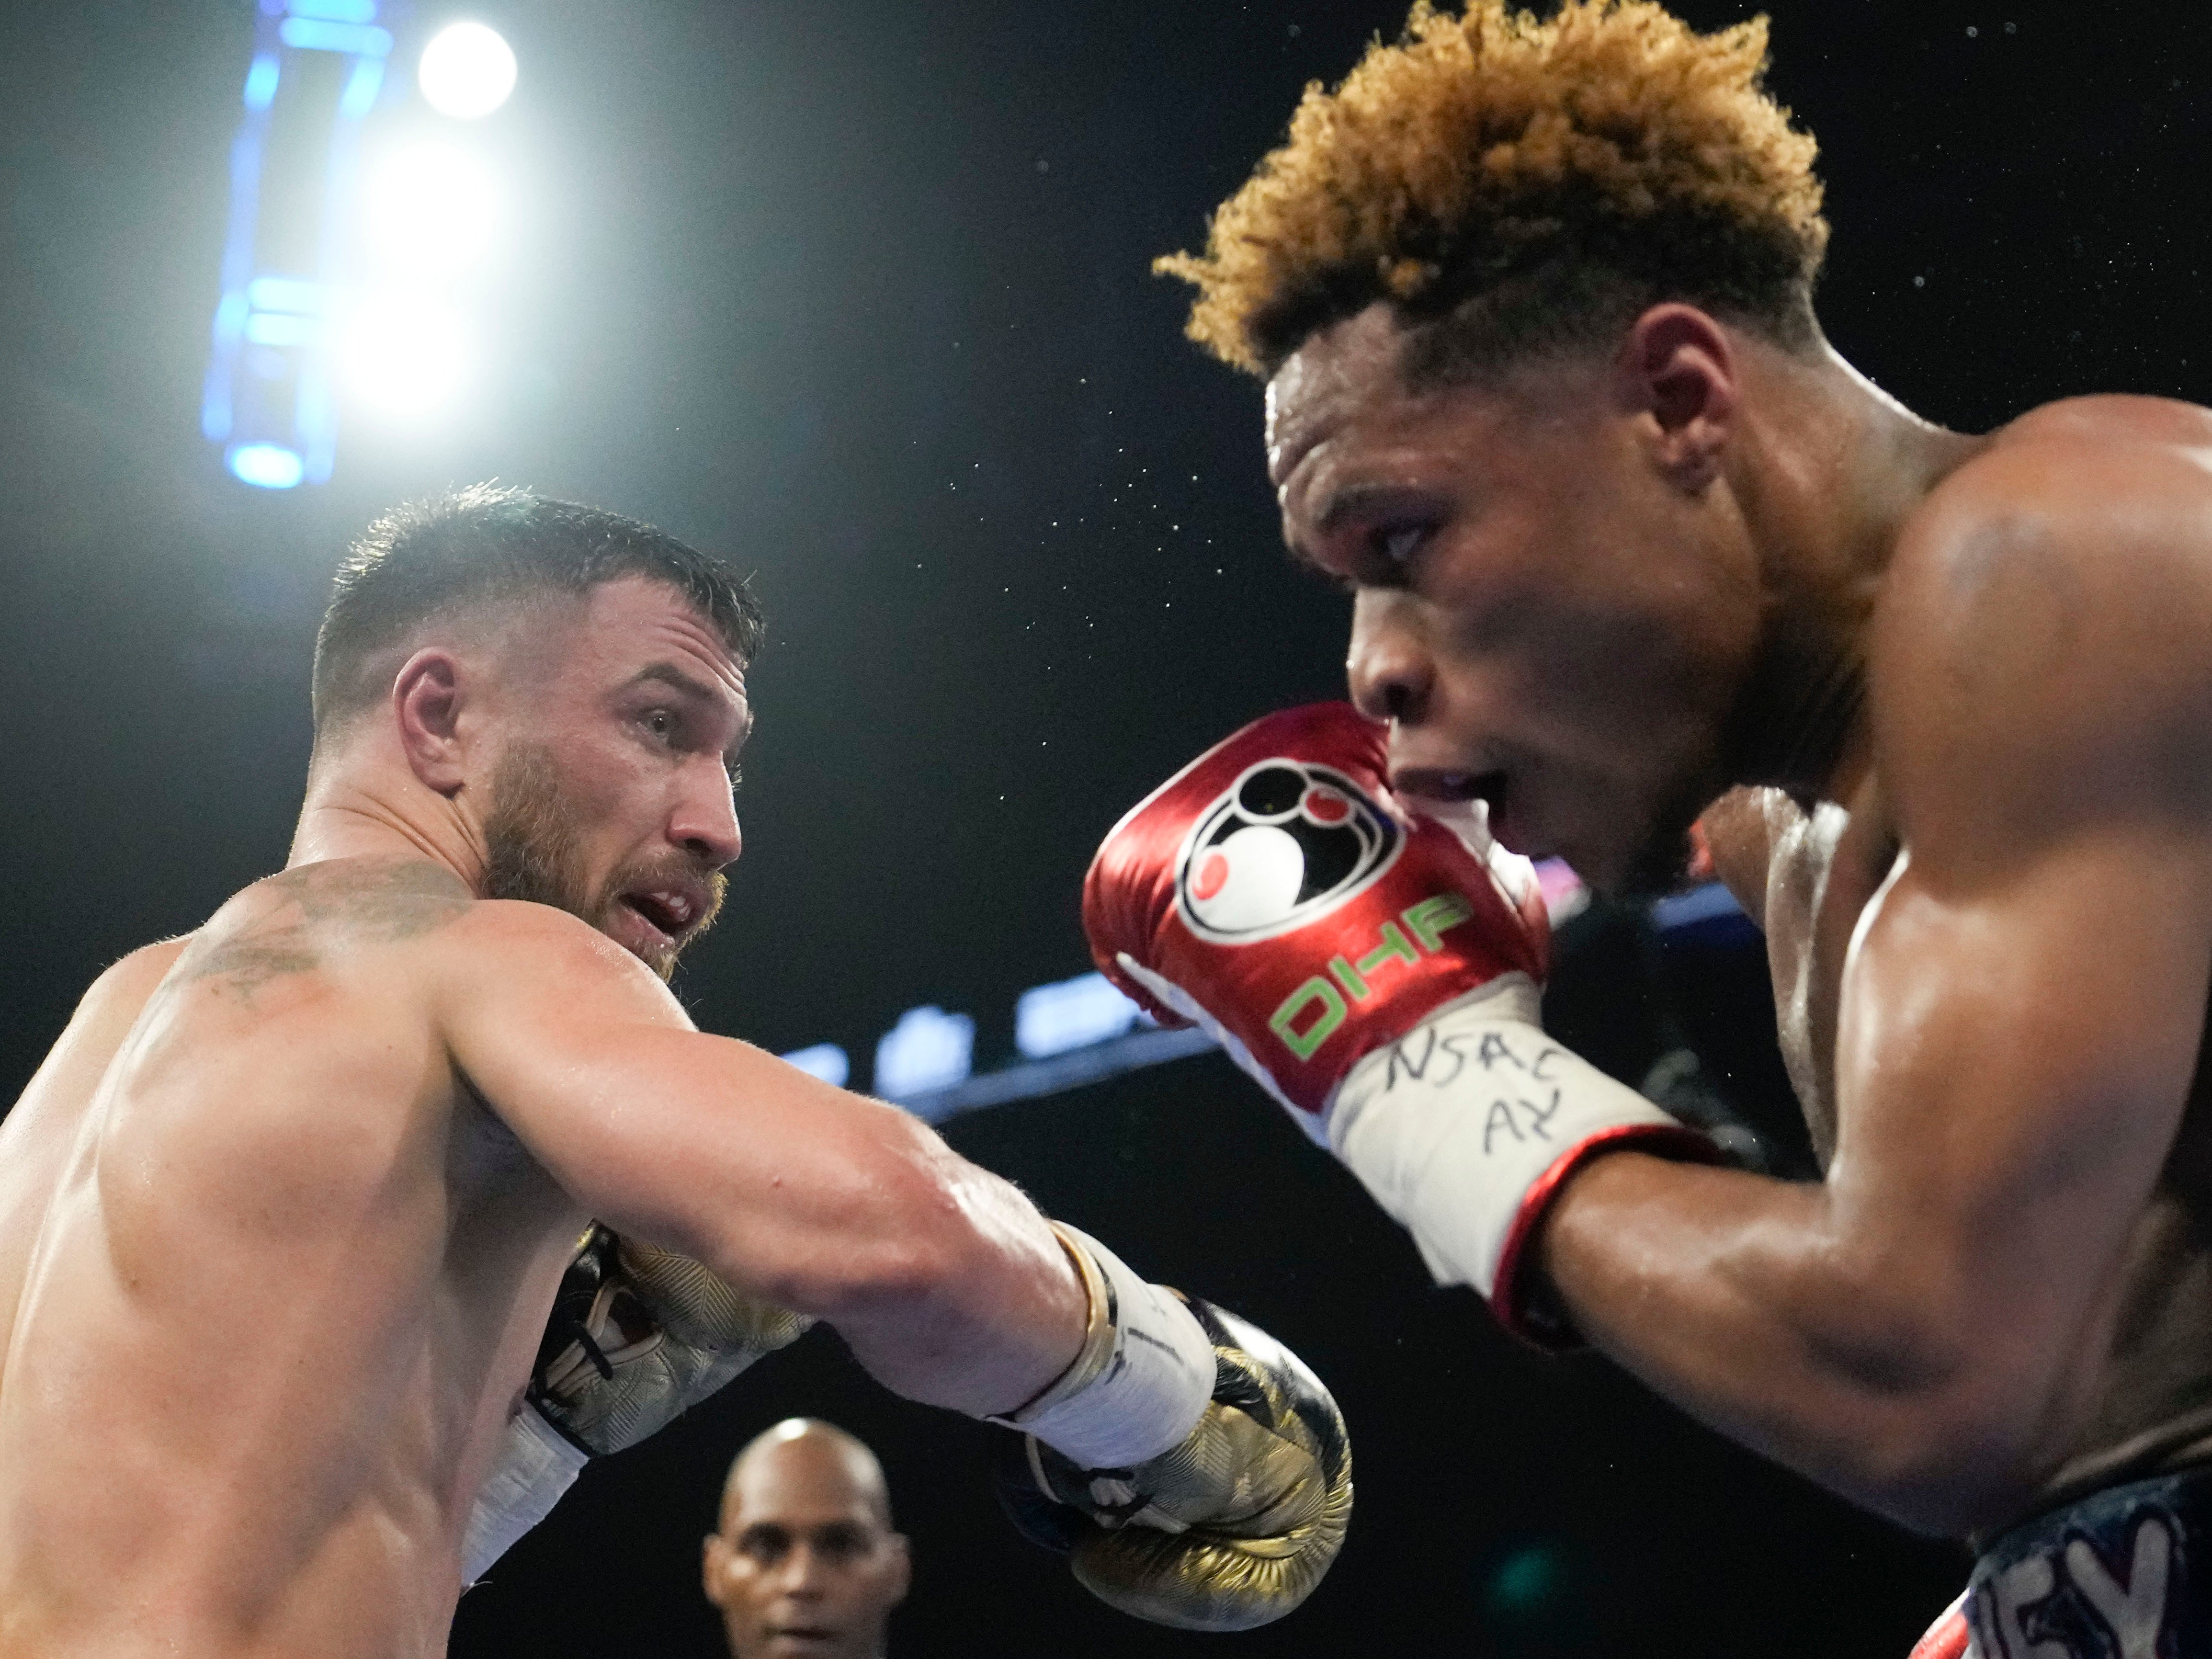 Devin Haney vs Vasiliy Lomachenko LIVE Result as title fight ends with narrow decision The Independent